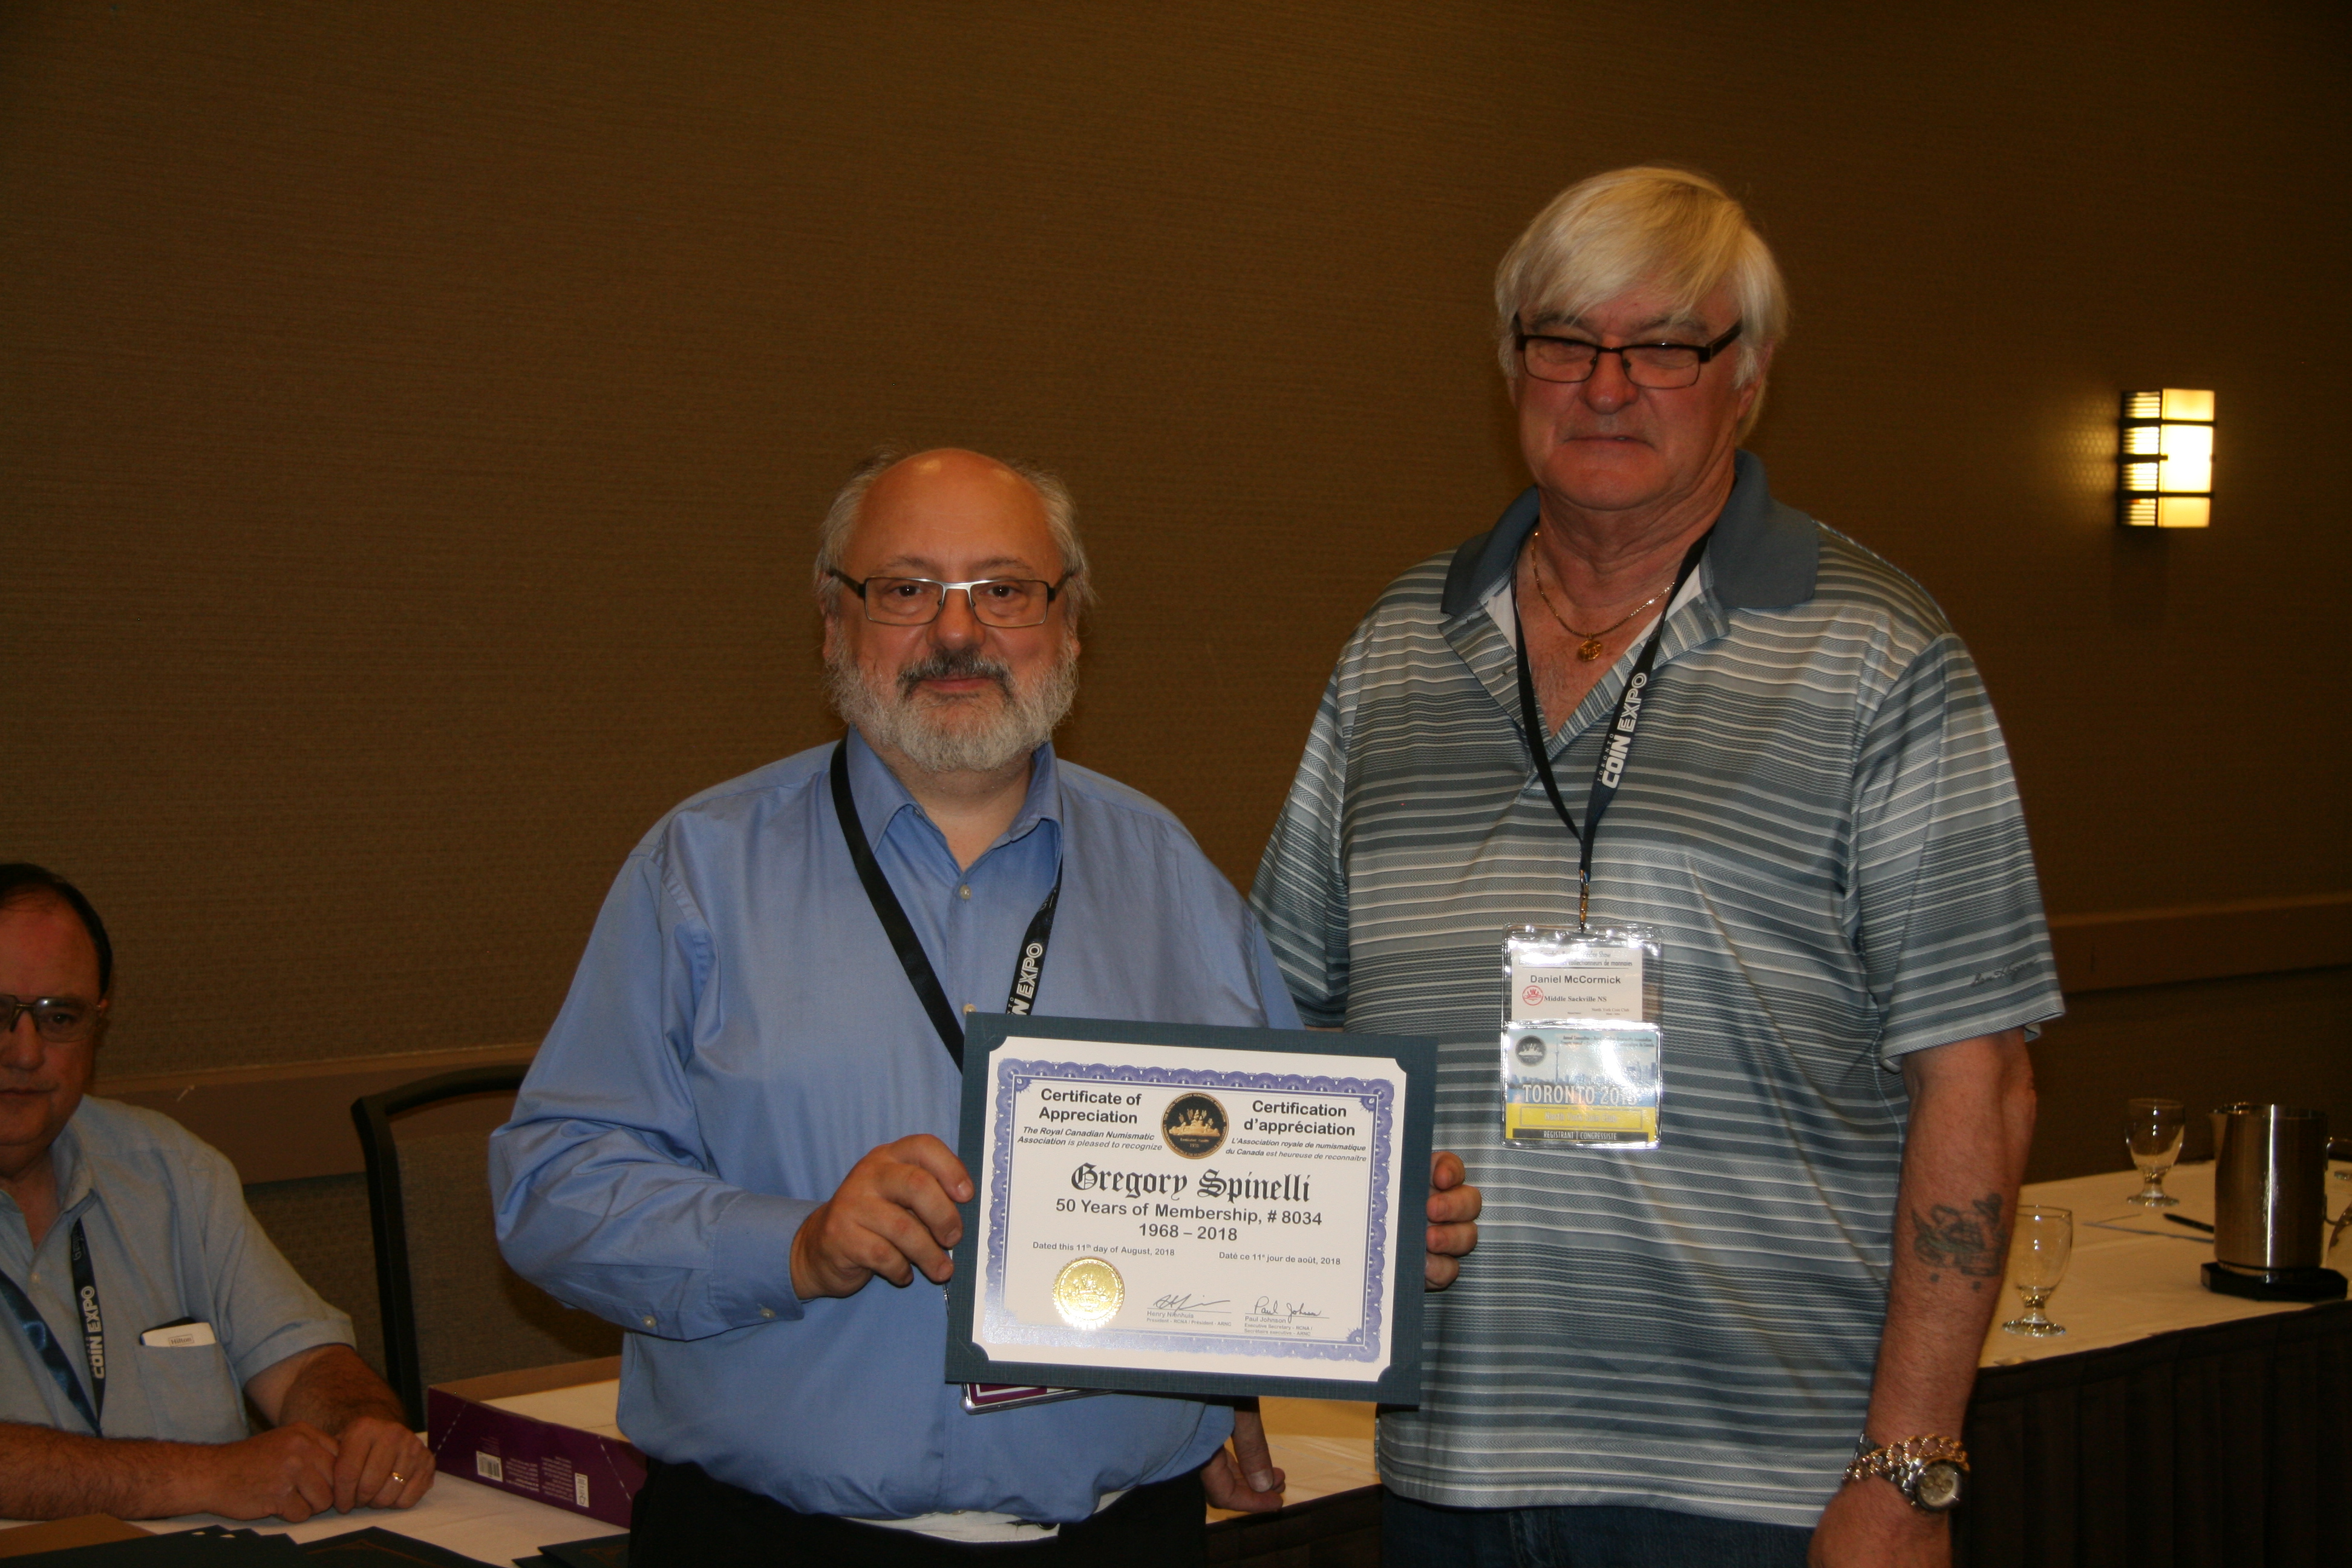 <p><strong>Dan McCormick</strong> (right) accepting the award for <strong>Gregory Spinelli</strong> who received his 50 years of membership recognition award from <strong>Henry Nienhuis</strong> (left).<br /> <small>Dan Gosling photo</small></p>